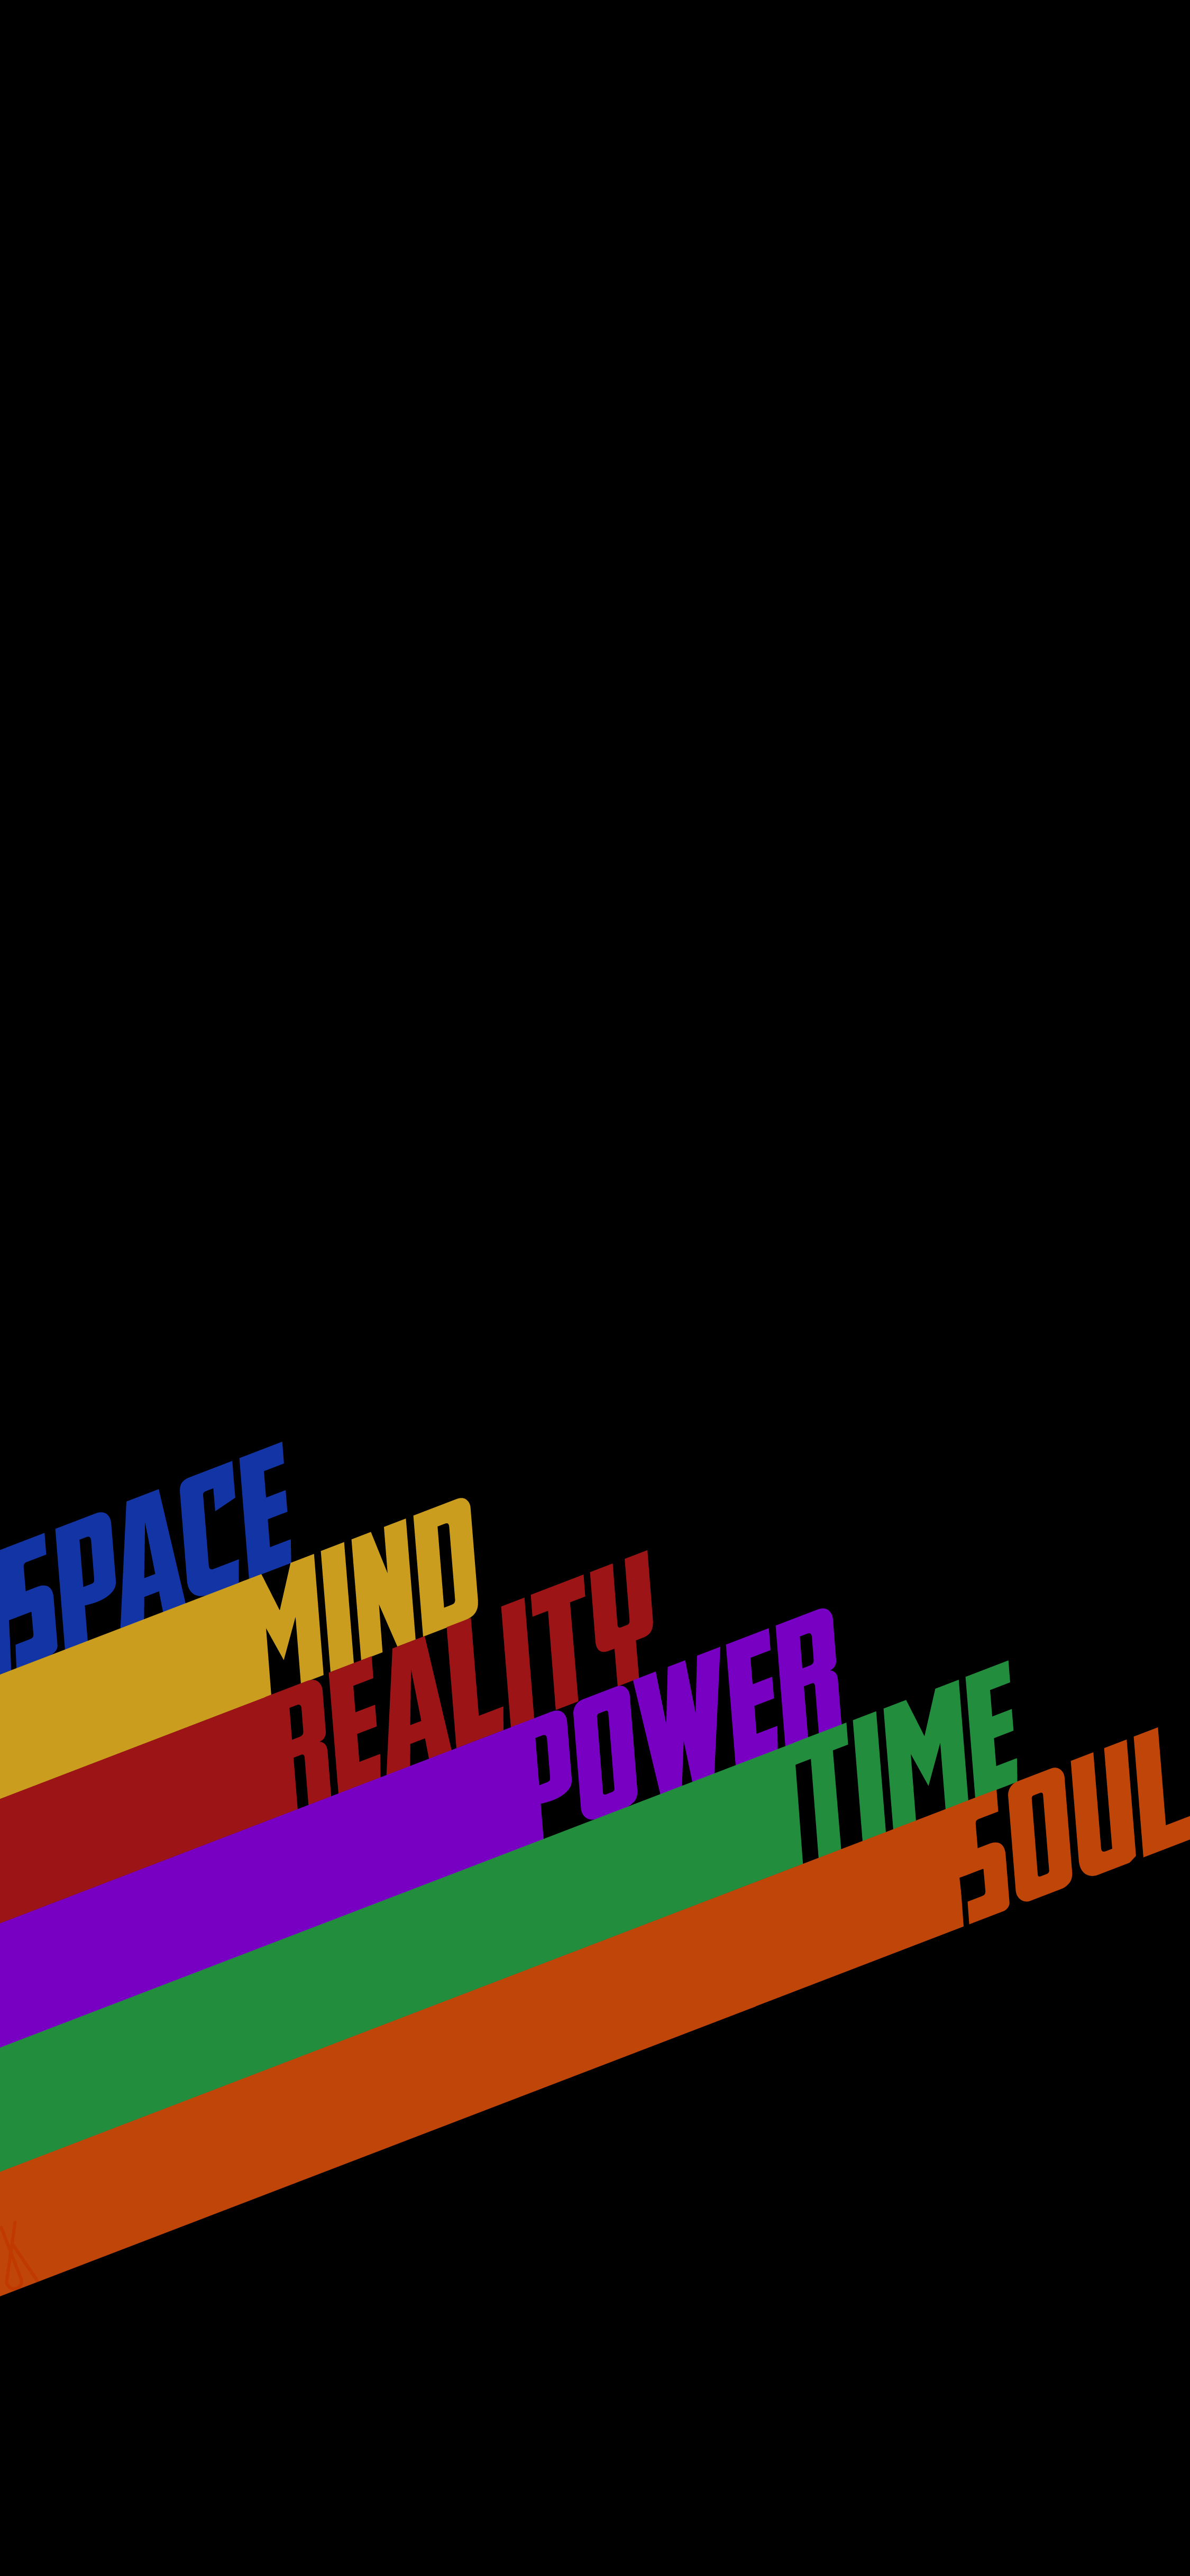 I made two minimalist phone wallpaper for Infinity War